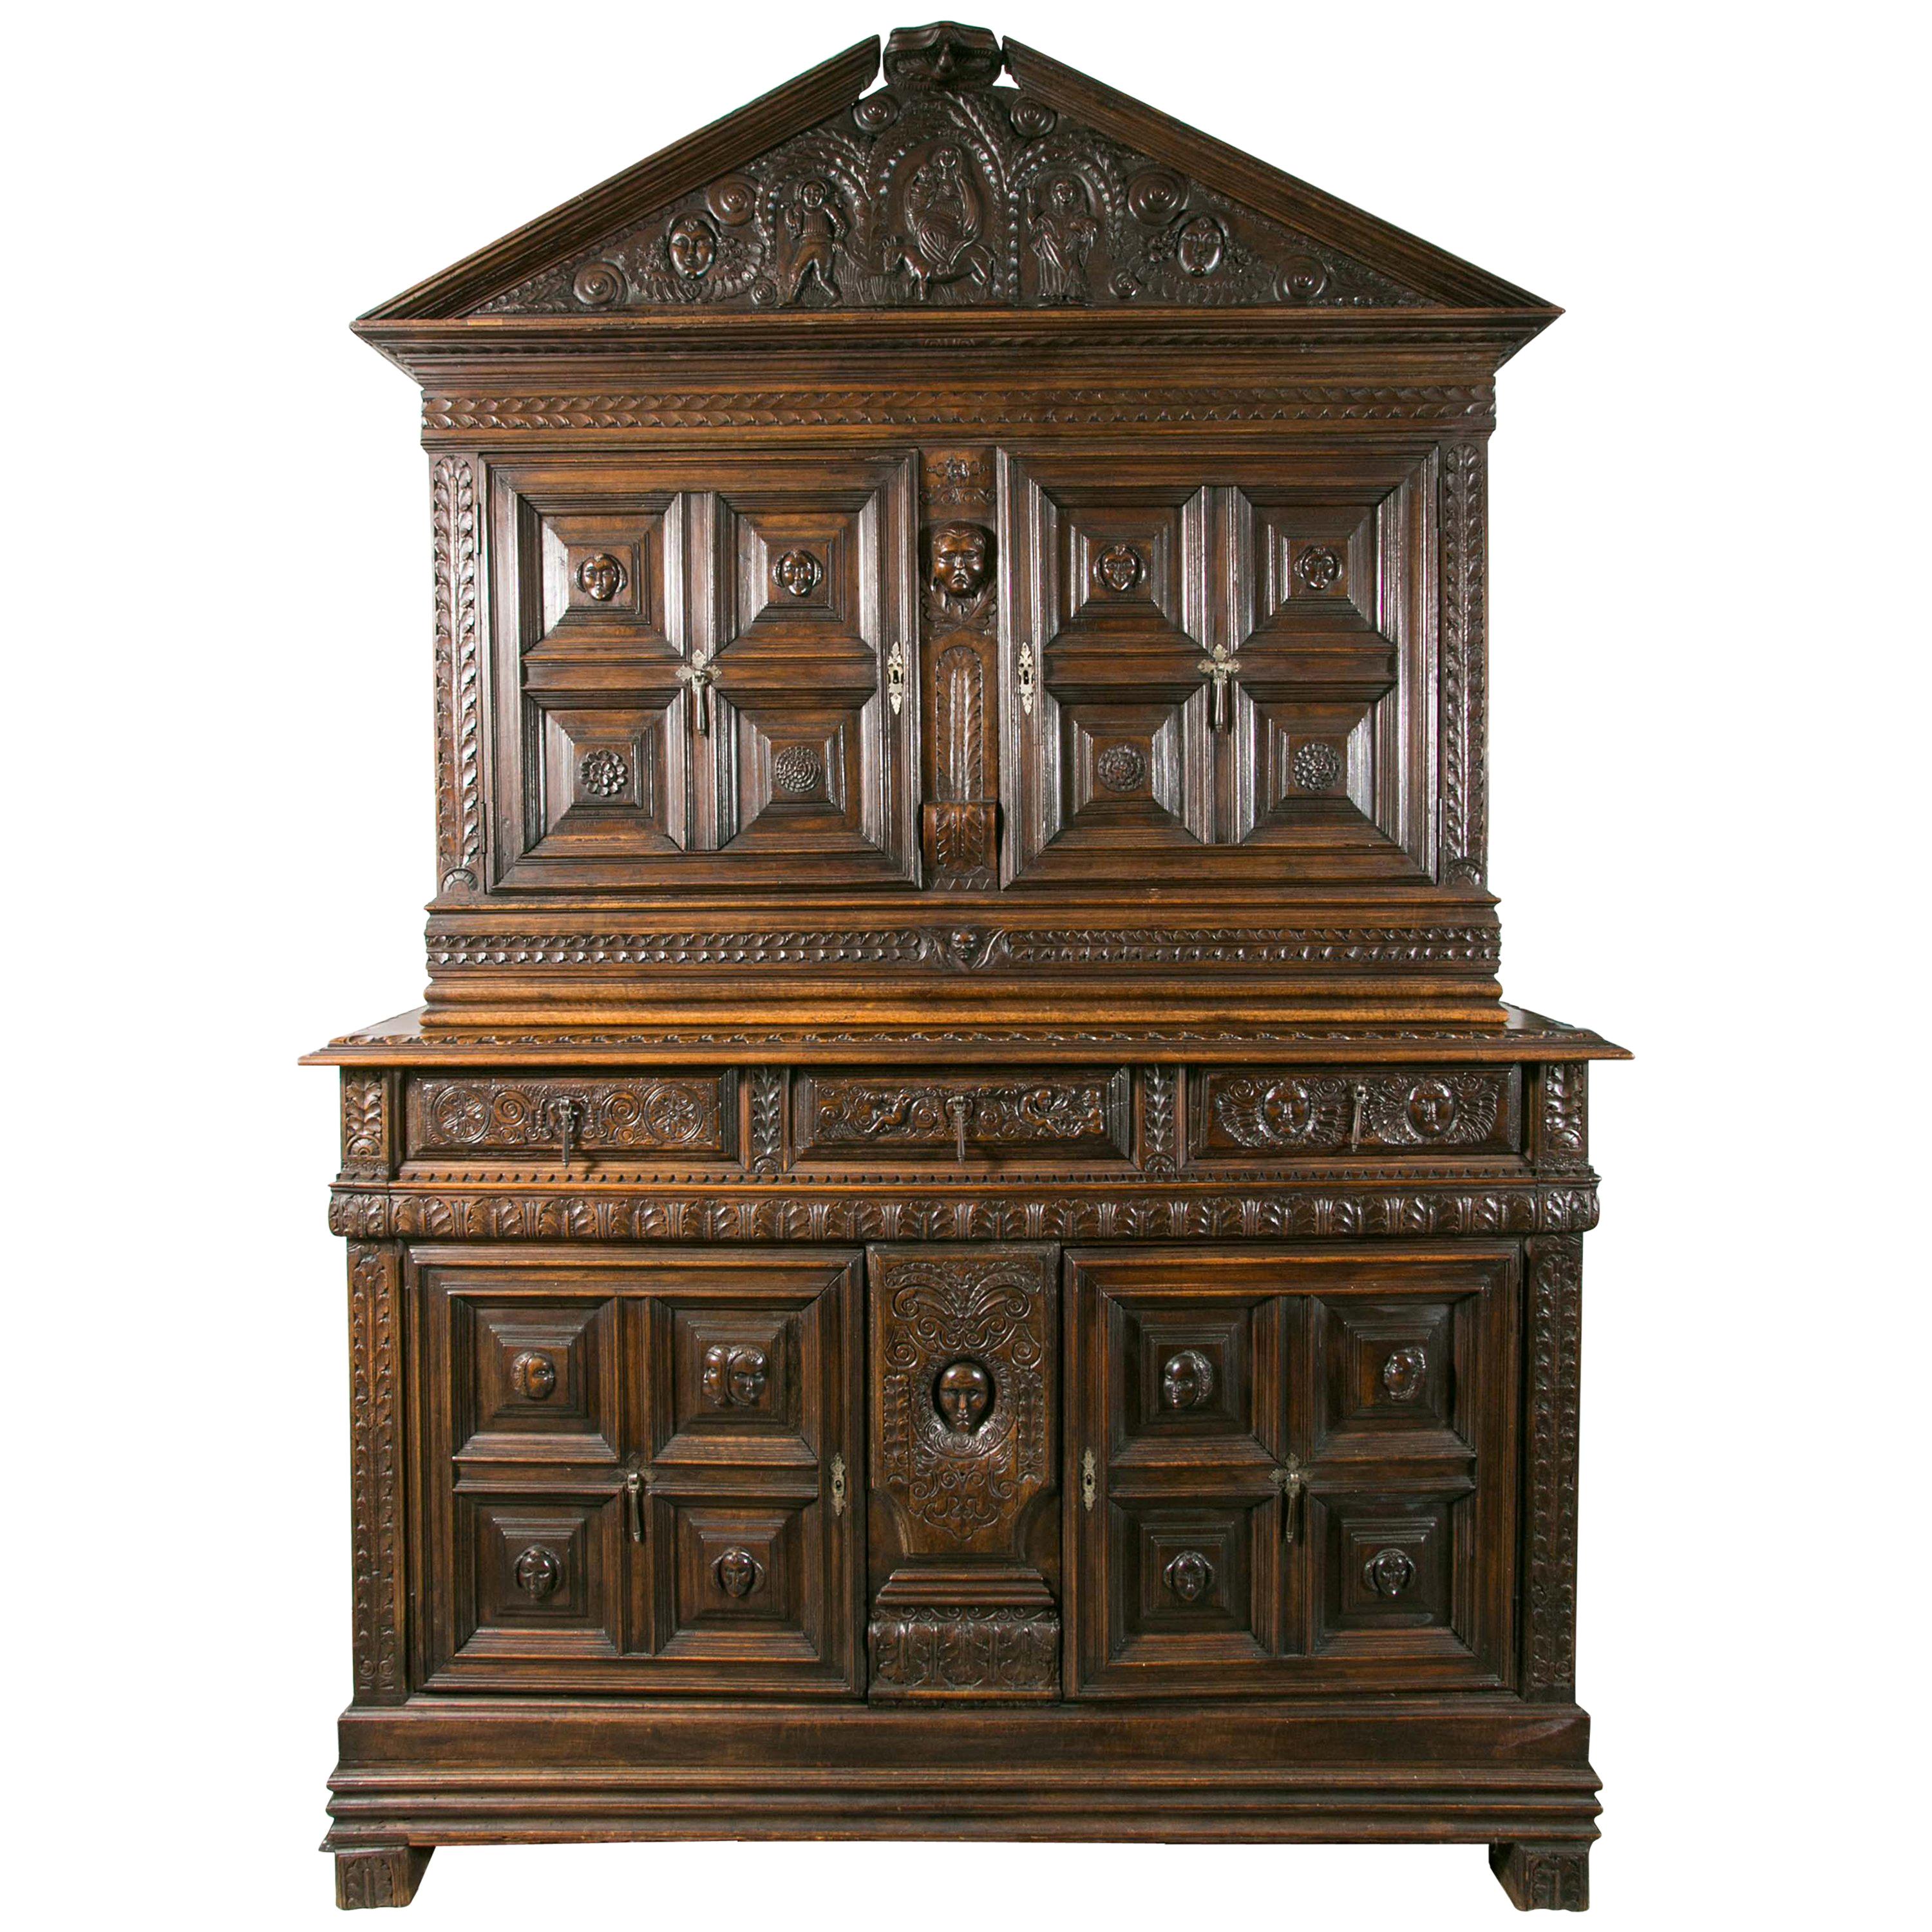 17th Century Furniture Important Supposedly from Northern Italy, Antique Art.